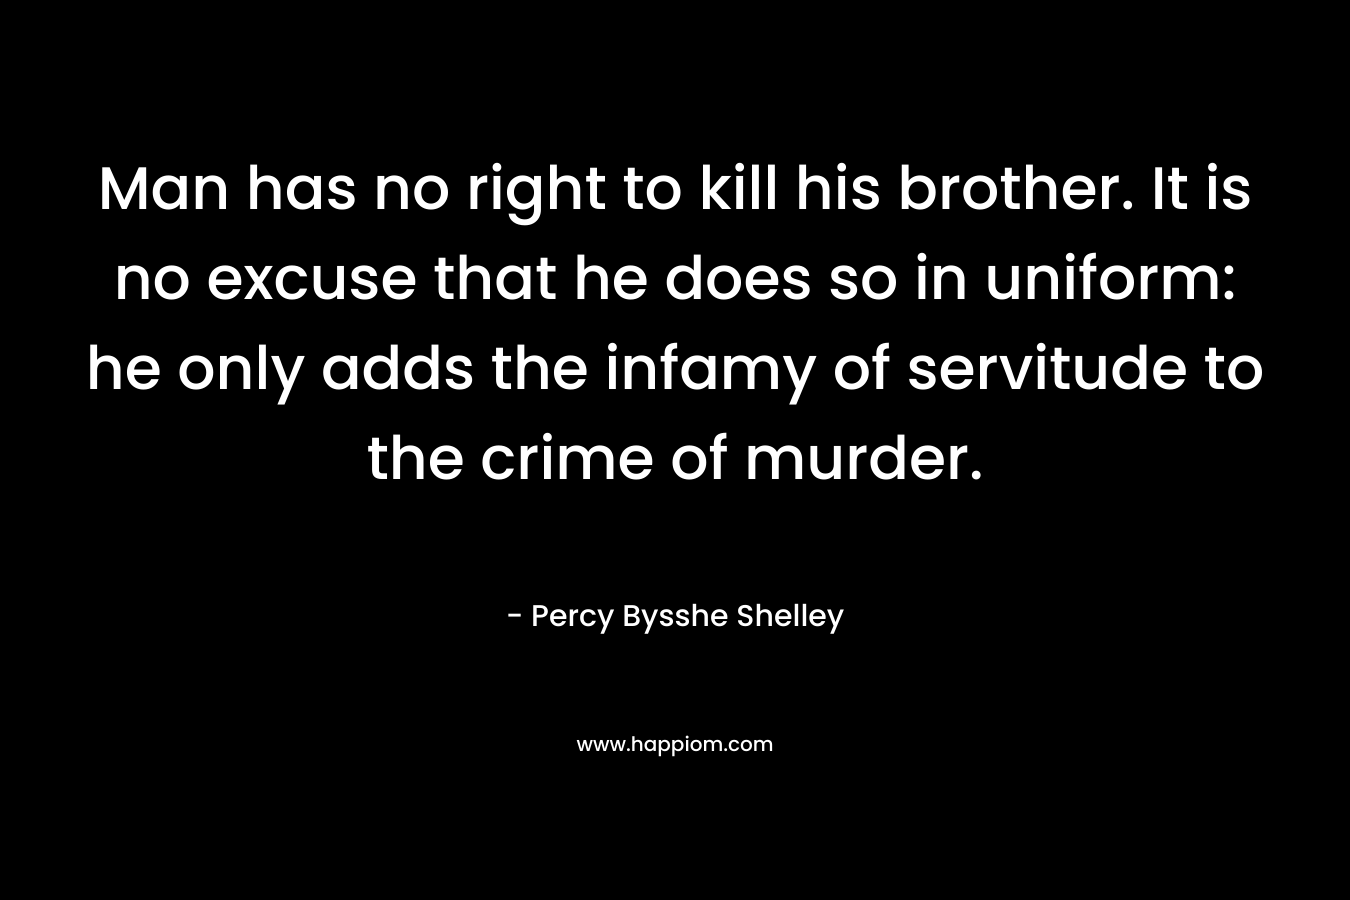 Man has no right to kill his brother. It is no excuse that he does so in uniform: he only adds the infamy of servitude to the crime of murder. – Percy Bysshe Shelley